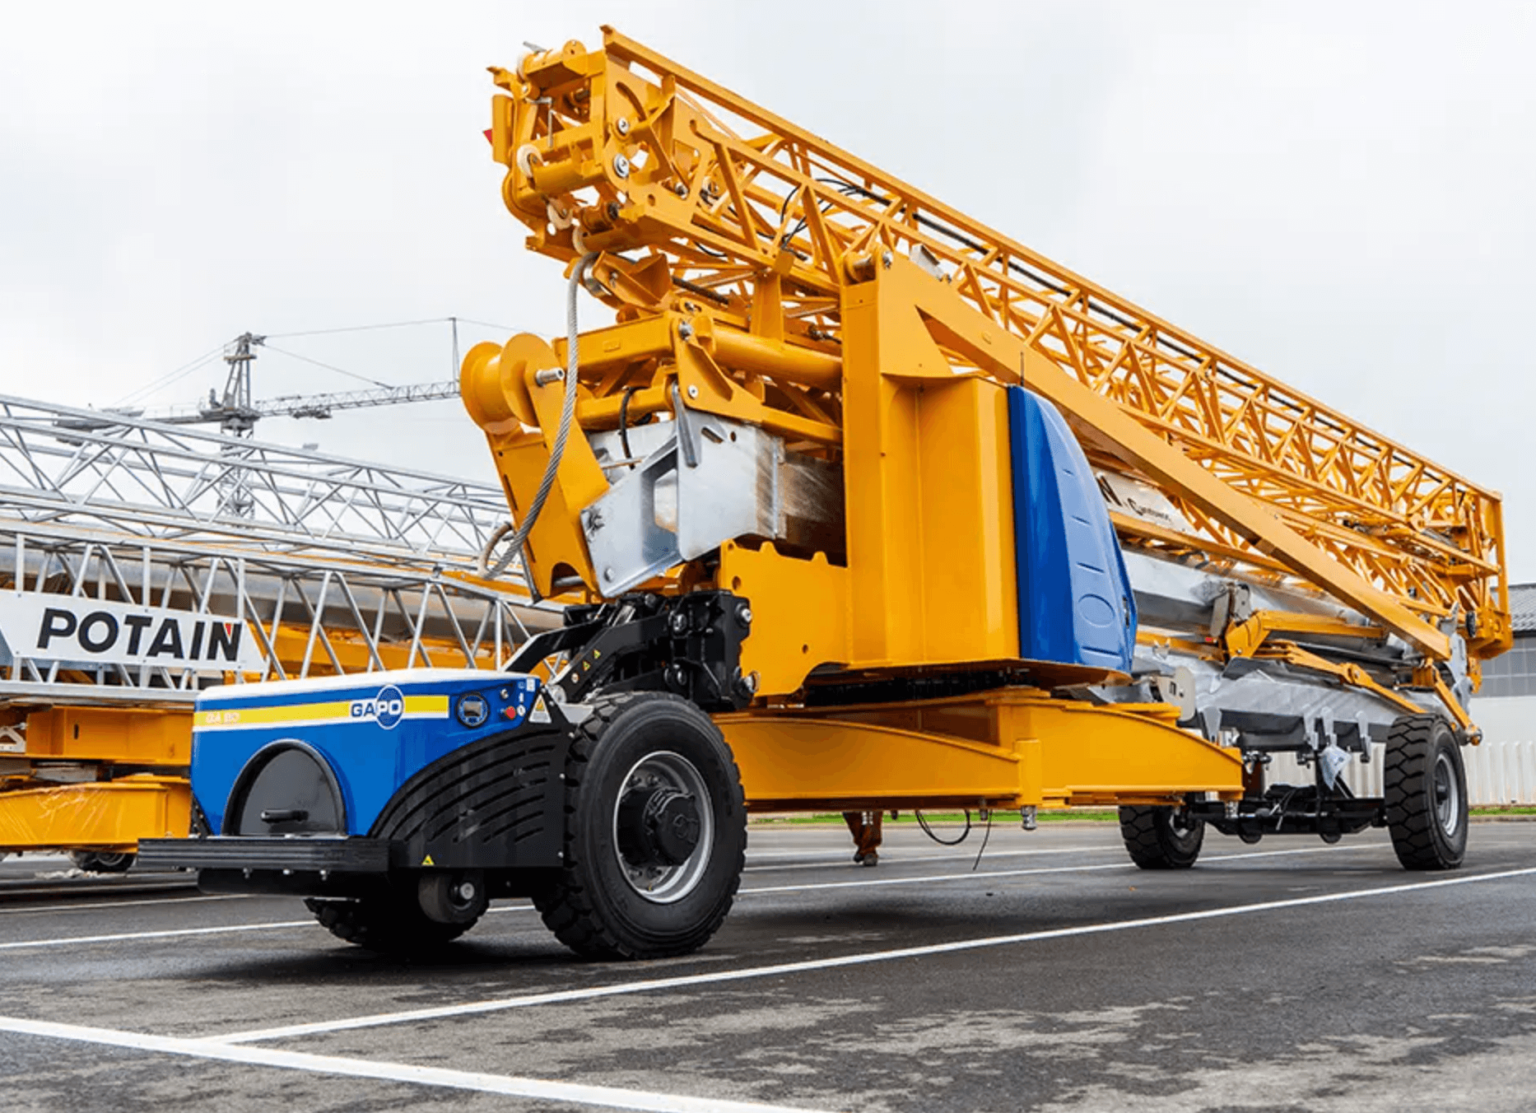 GAPO Compact And Powerful Crane Mover North Tyneside North Shields